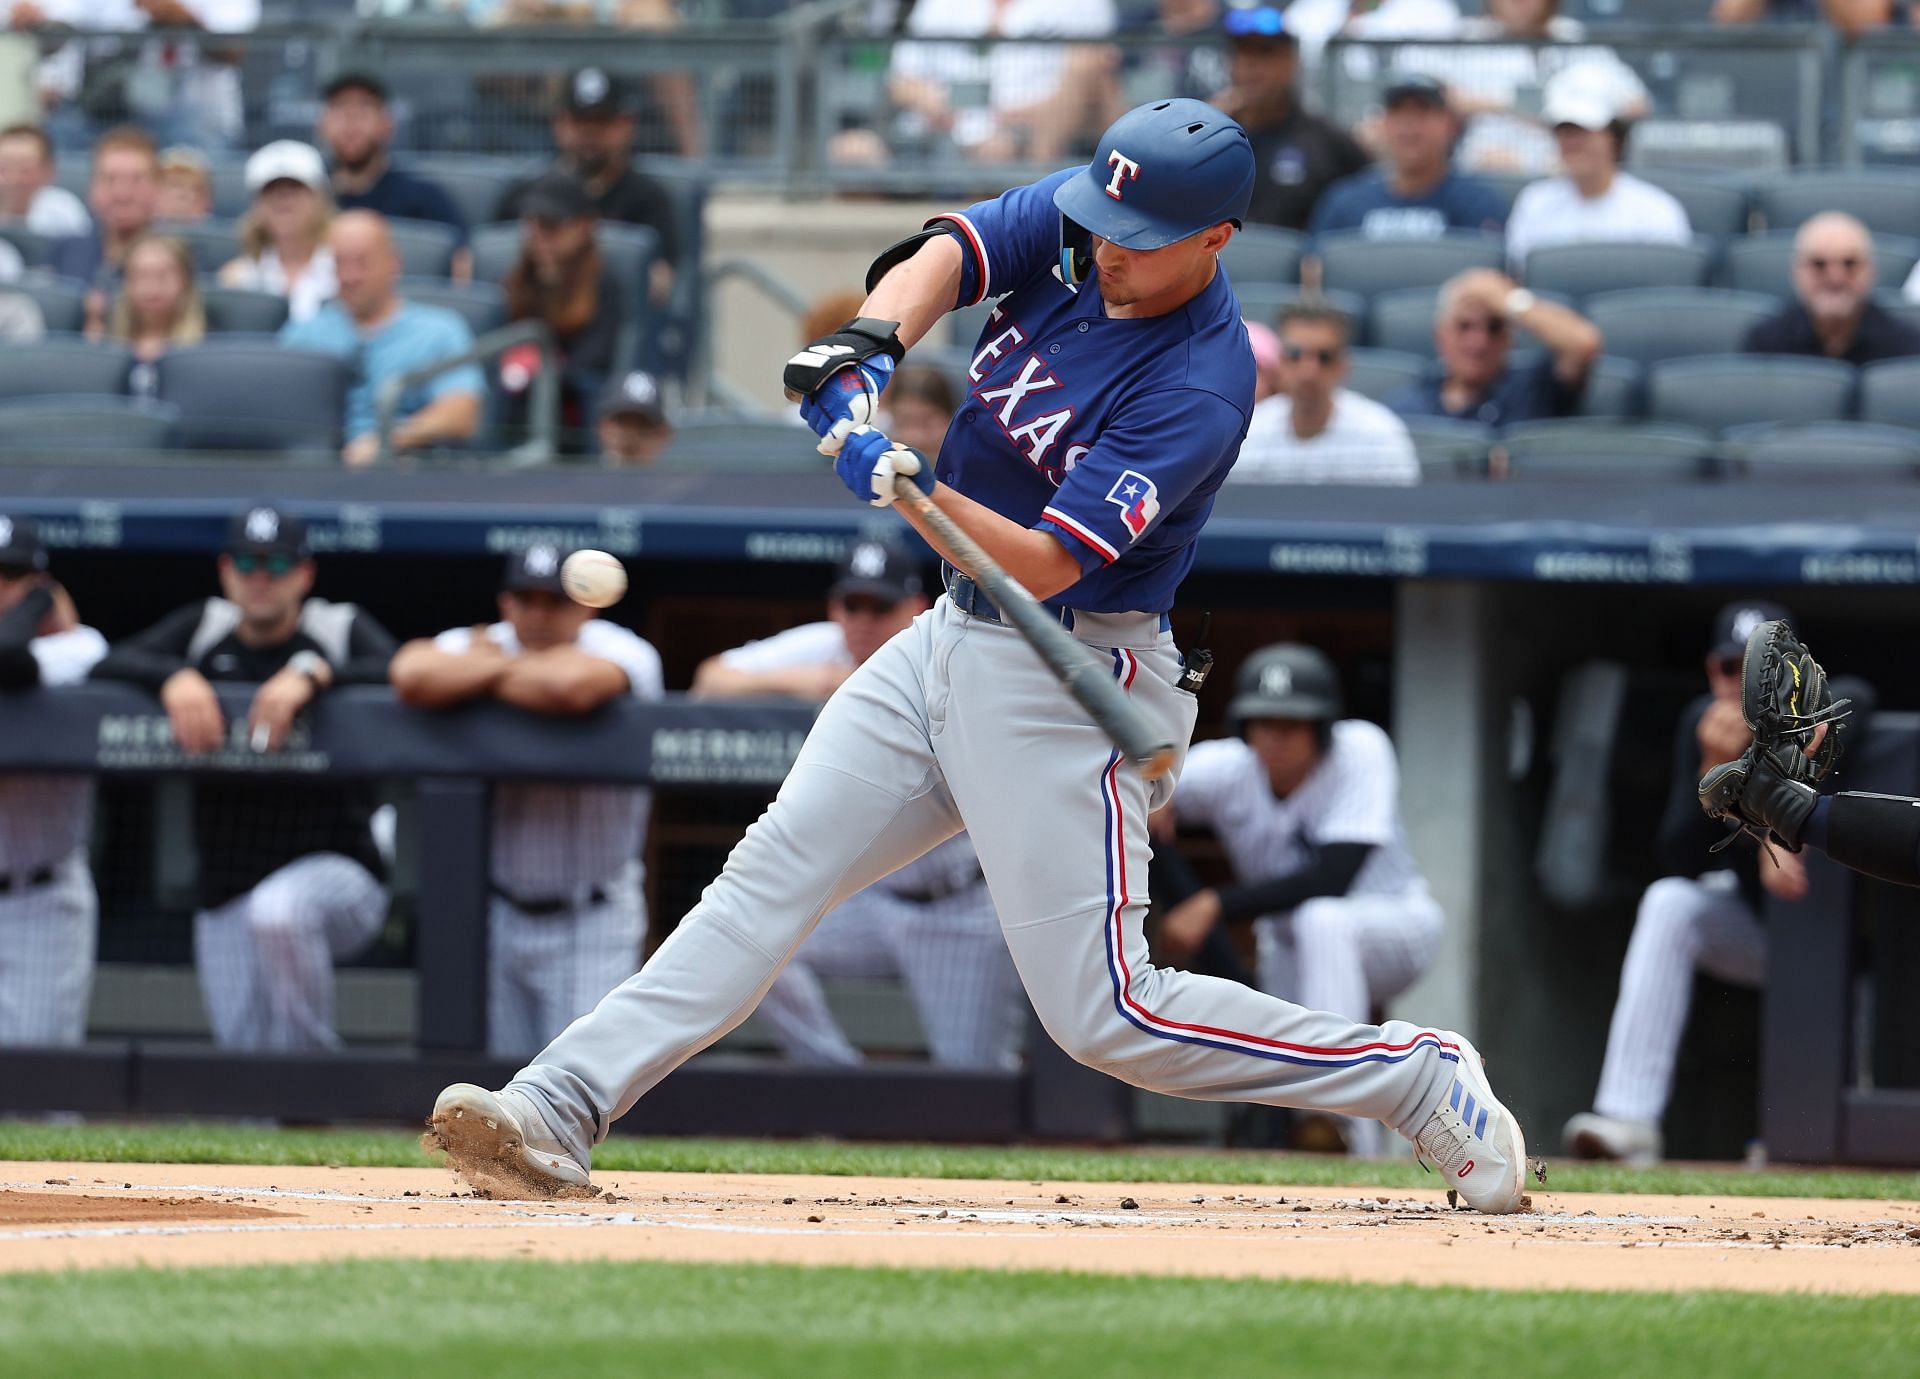 Corey Seager #5 of the Texas Rangers bats against the New York Yankees